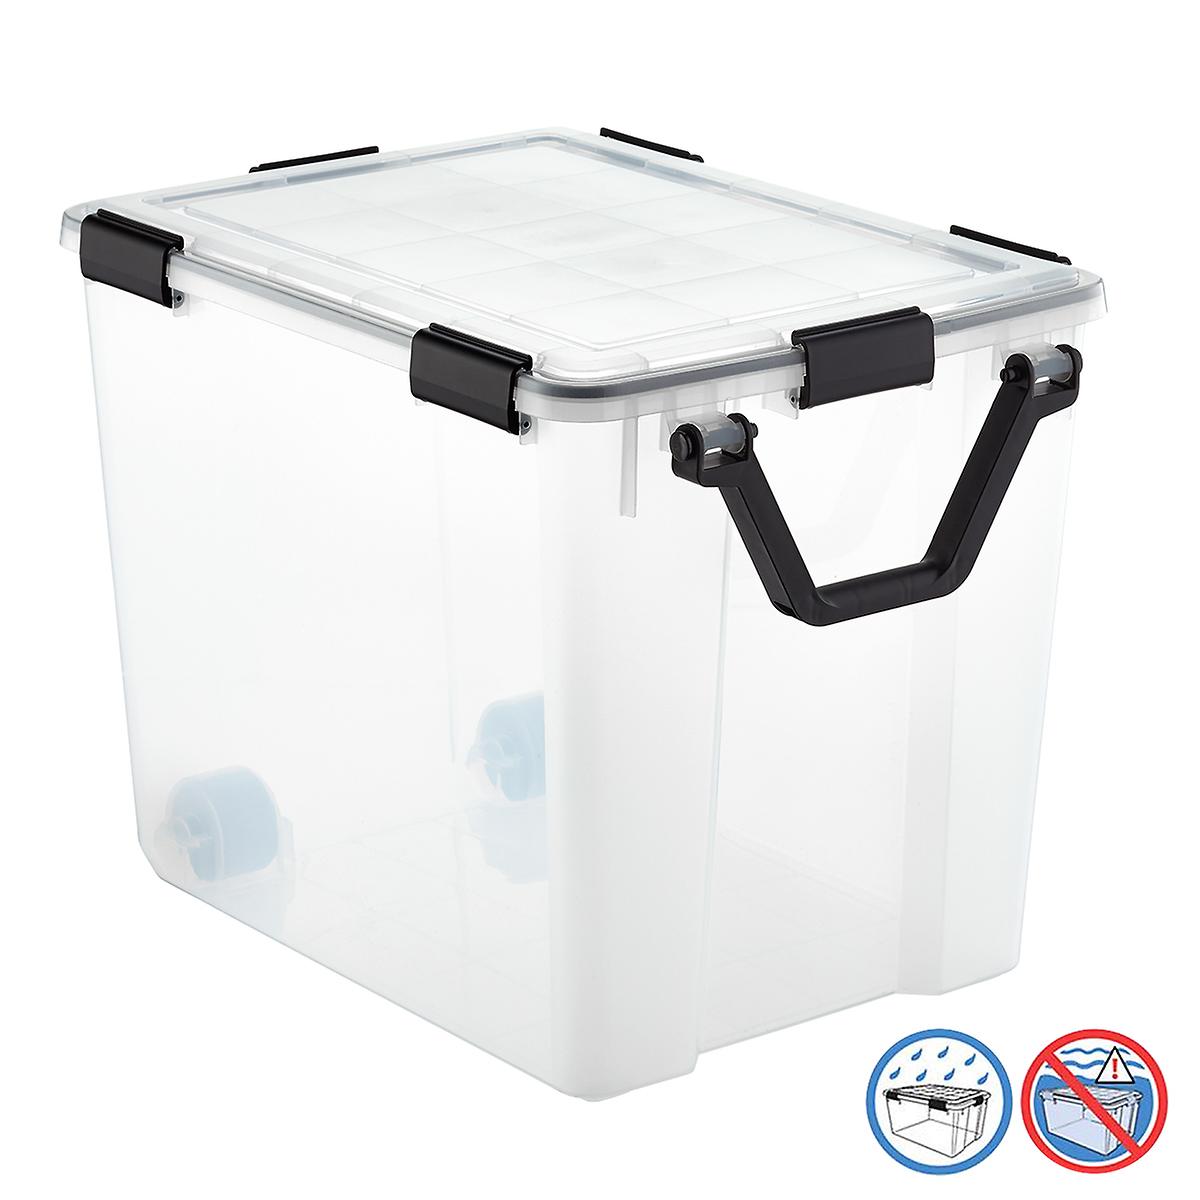 103 Qt Weathertight Tote With Wheels, Colored Storage Bins On Wheels